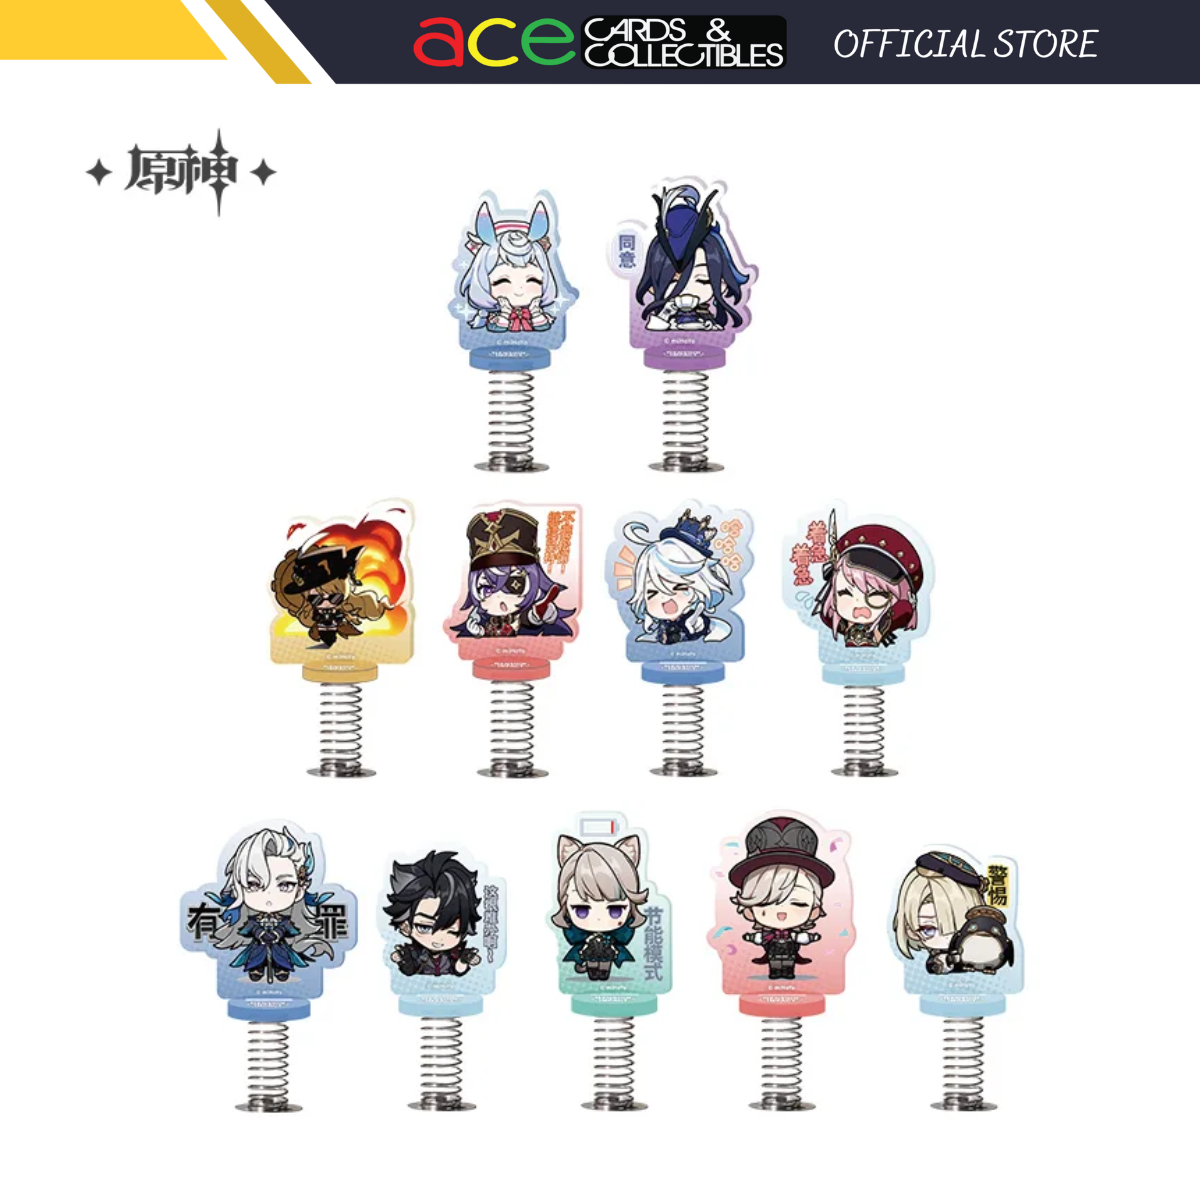 miHoYo Genshin Impact but Chibi Fontaine Character vol Expression Shaking Acrylic Stand-Sigewinne-miHoYo-Ace Cards & Collectibles